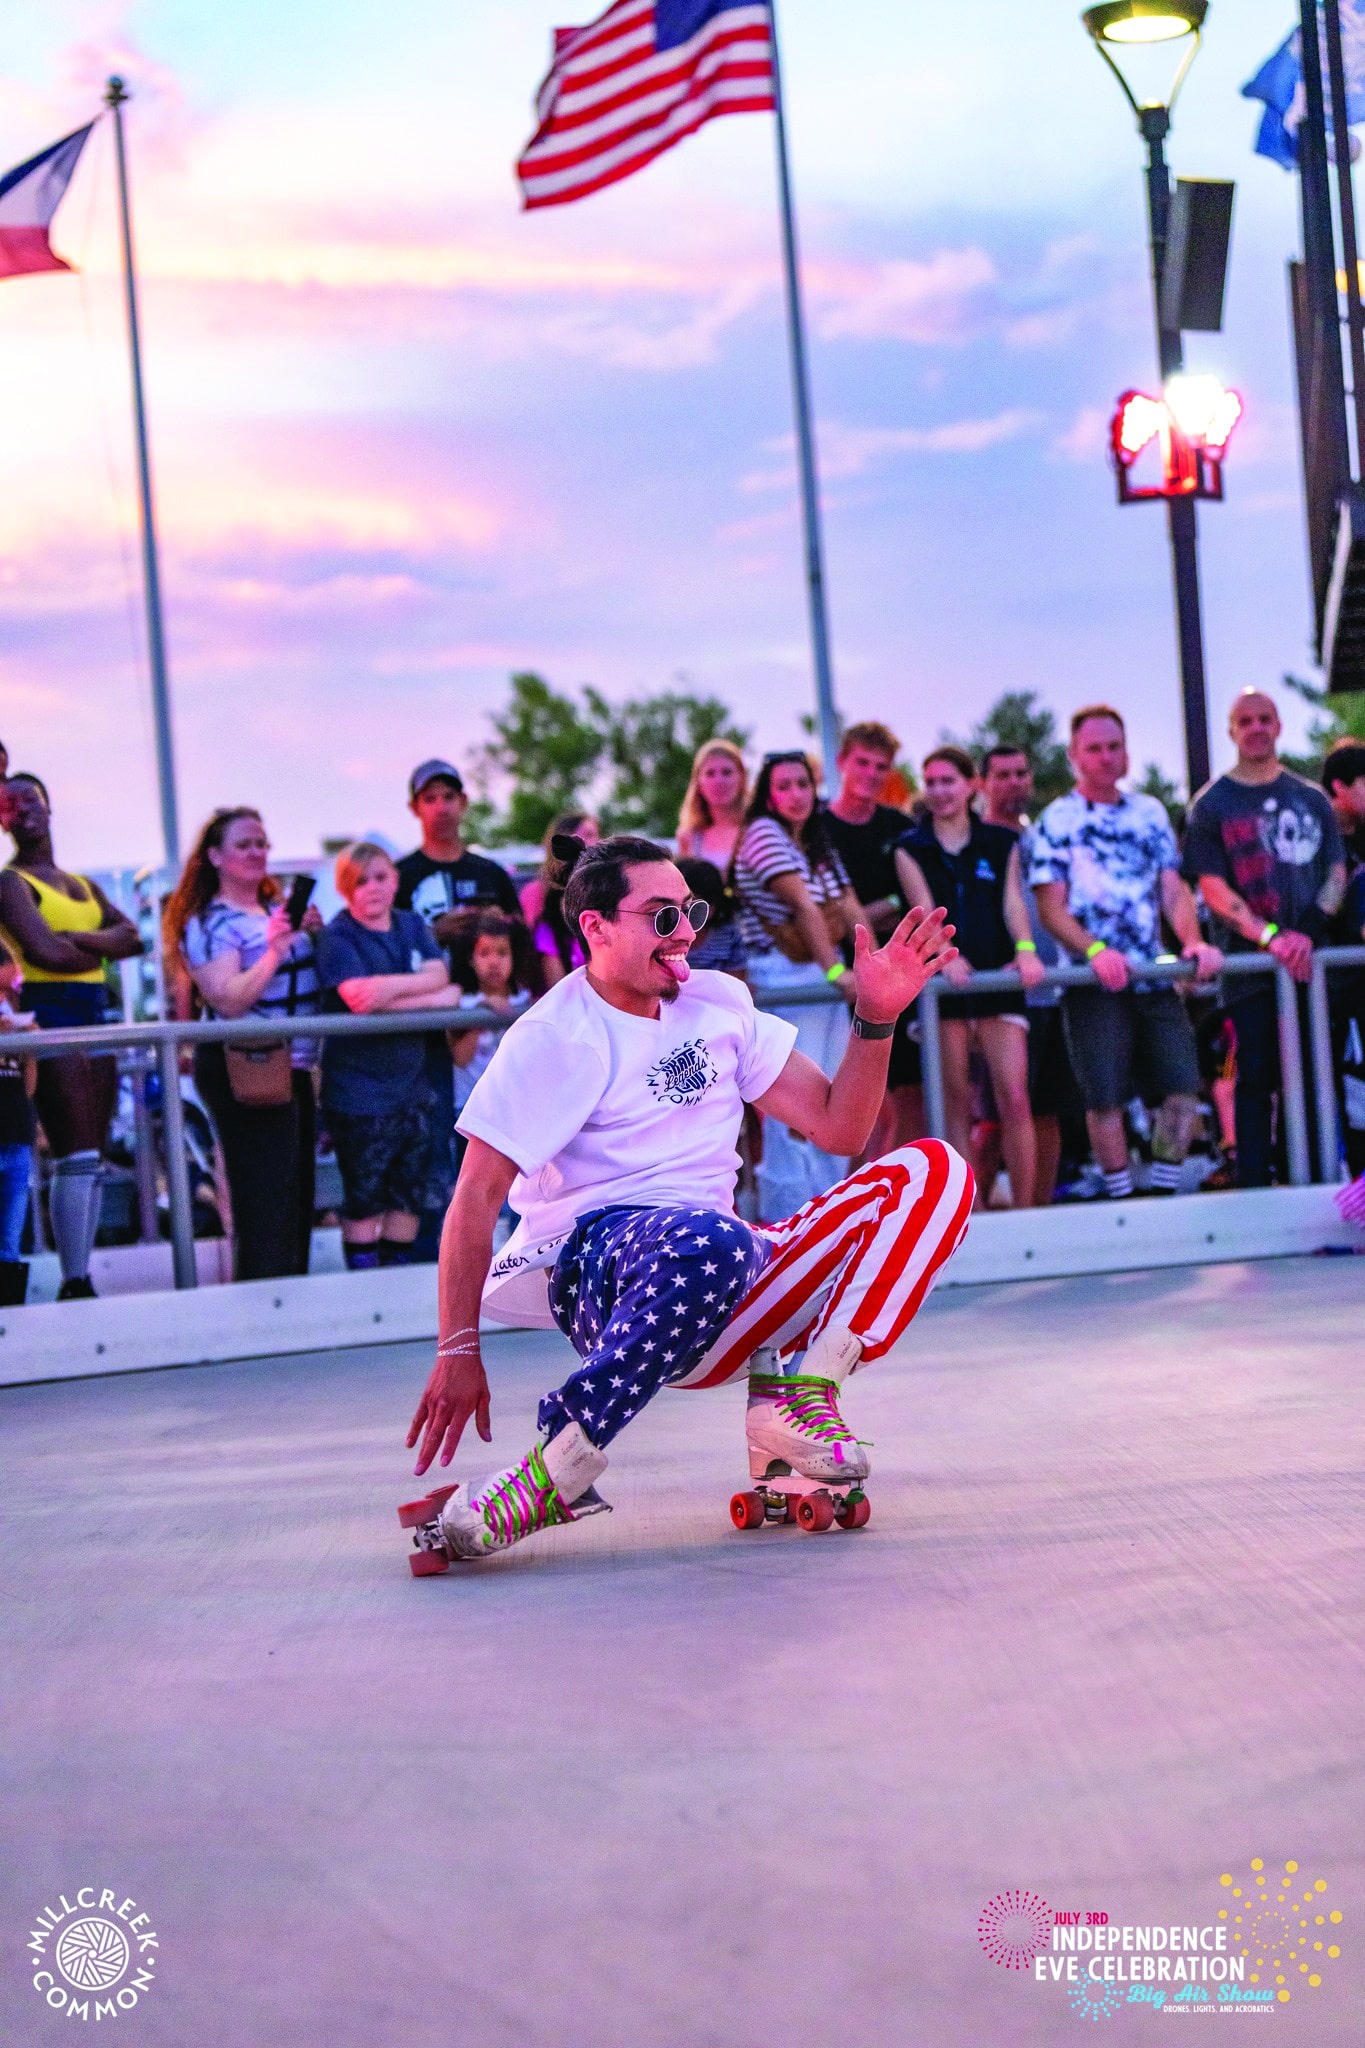 Man roller skaying in American flag pants at Millcreek Commons